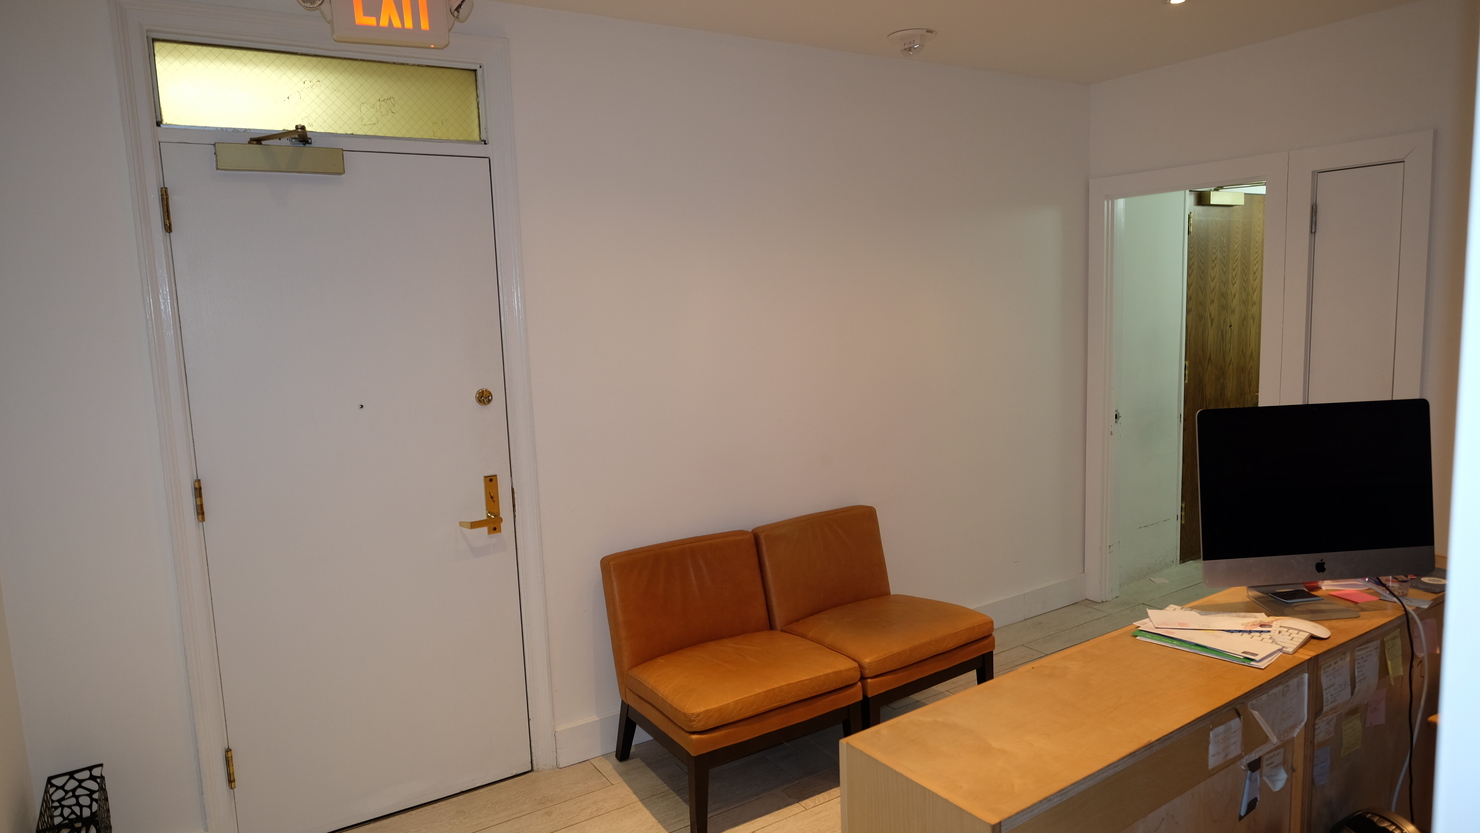 58 West 57th Street Office Space - Reception Area